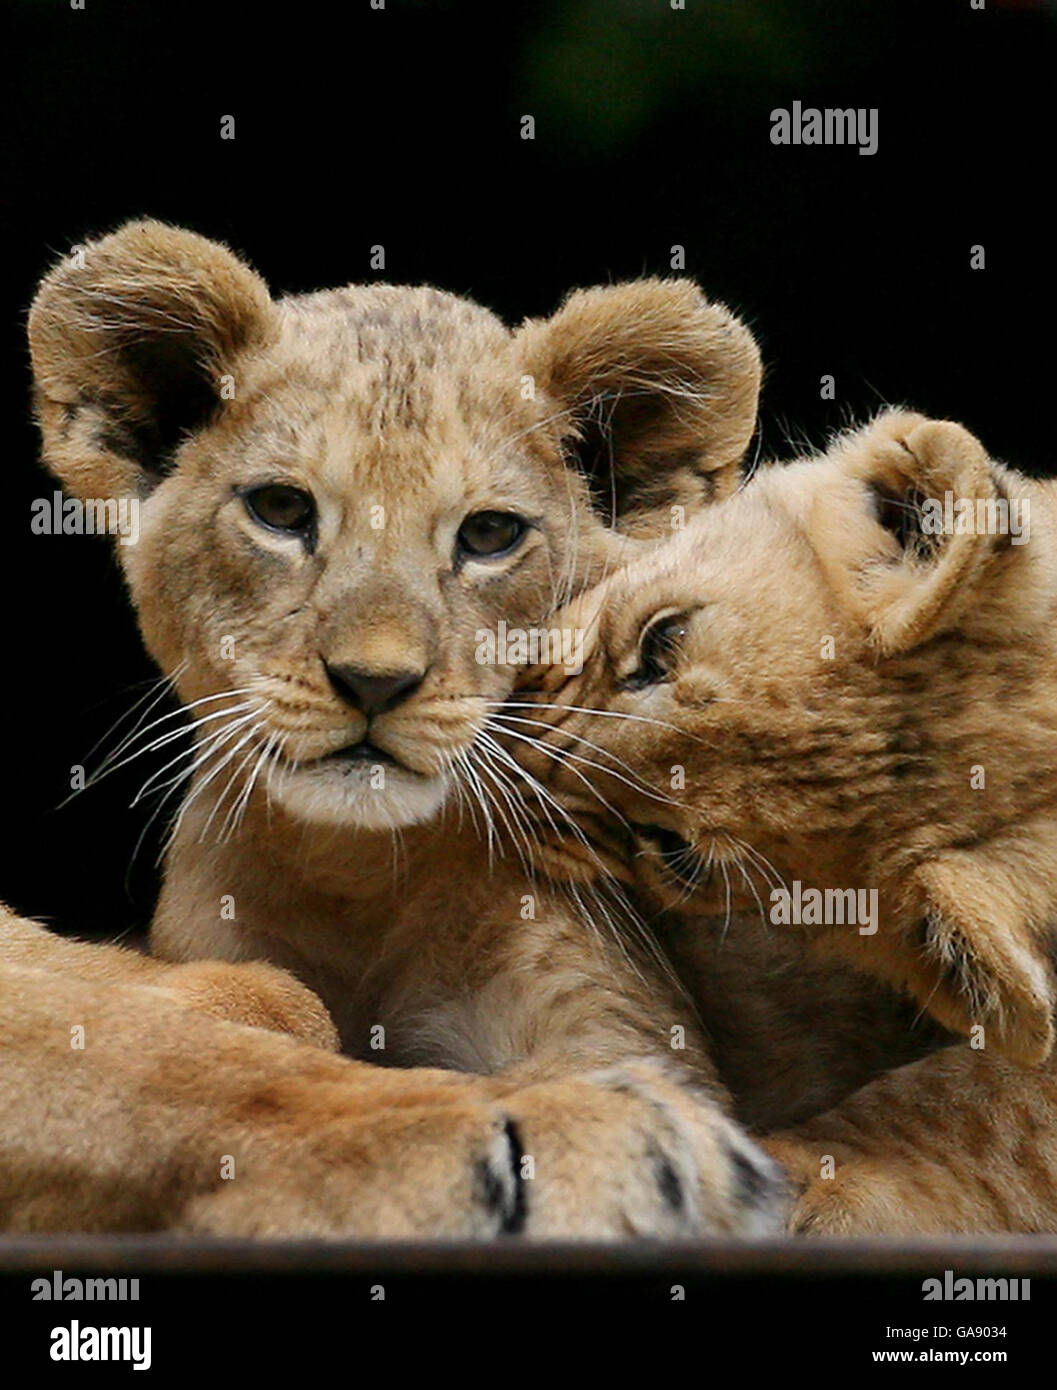 Lion cubs at Port Lympne Wild Animal Park. Aswad and Buni (right) two rare Barbary lion cubs with mum Saffiya at Port Lympne Wild Animal Park in Kent. Stock Photo